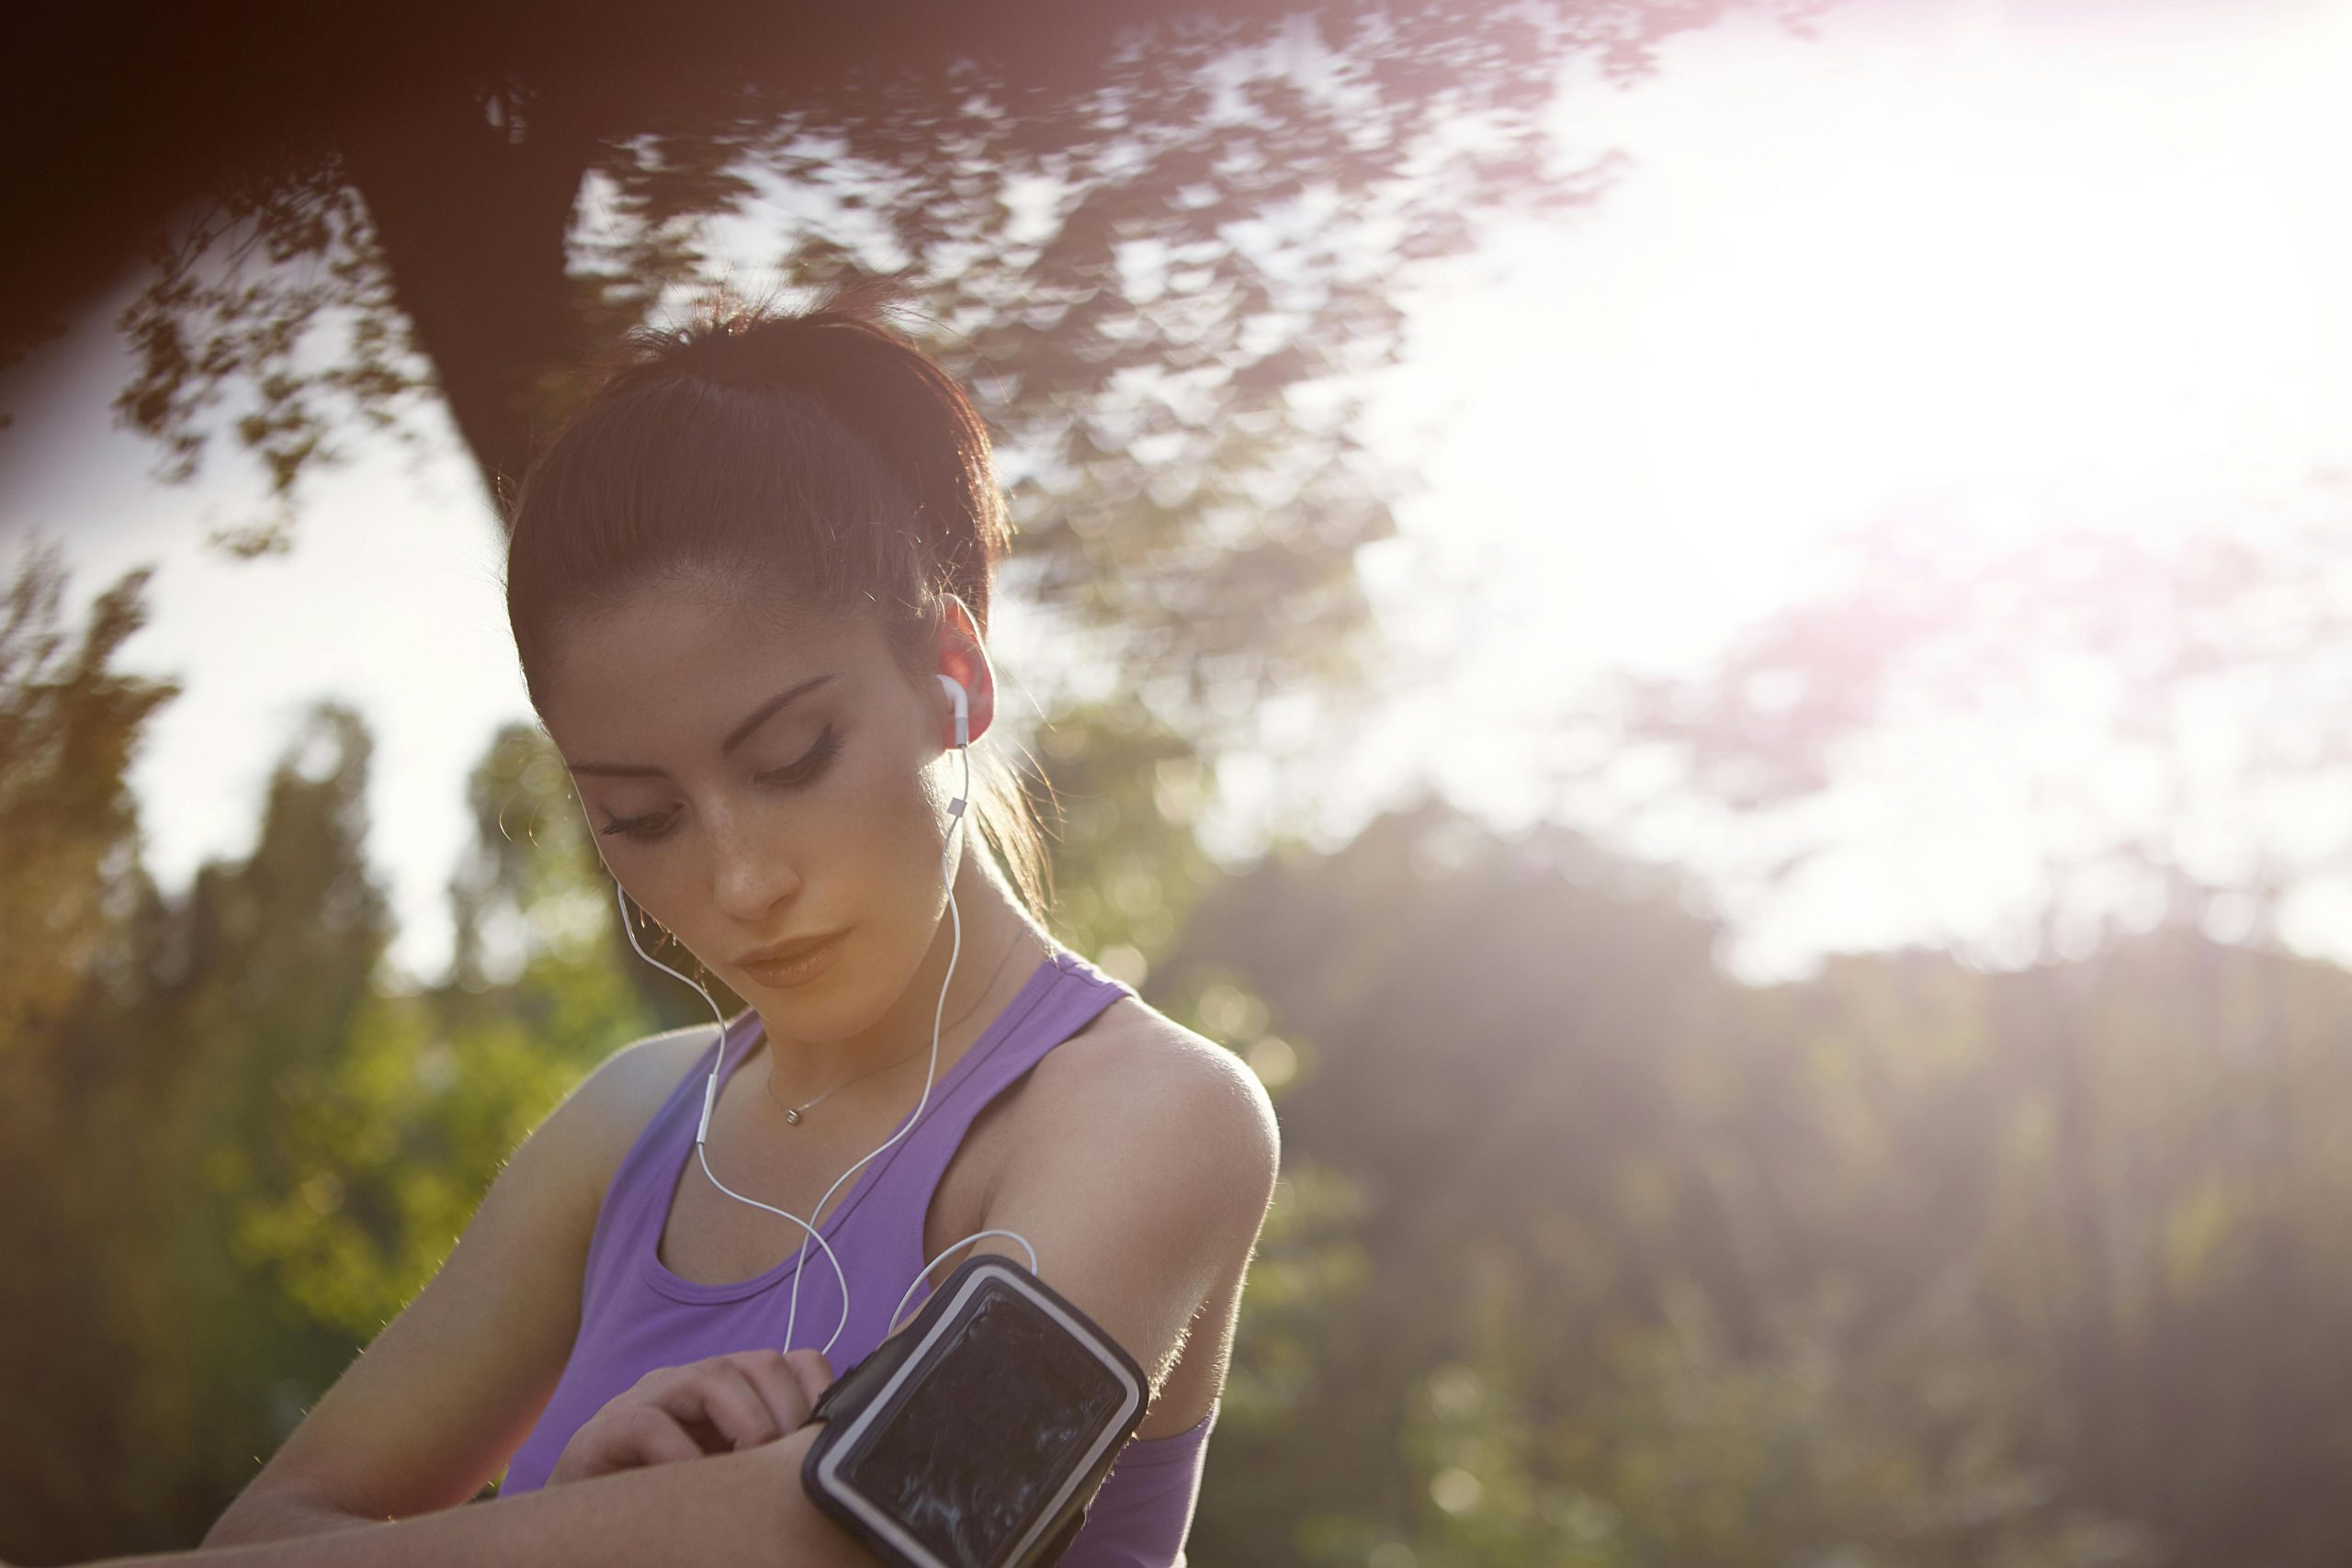 Woman checking her fitness tracker during an outdoor workout at sunset.